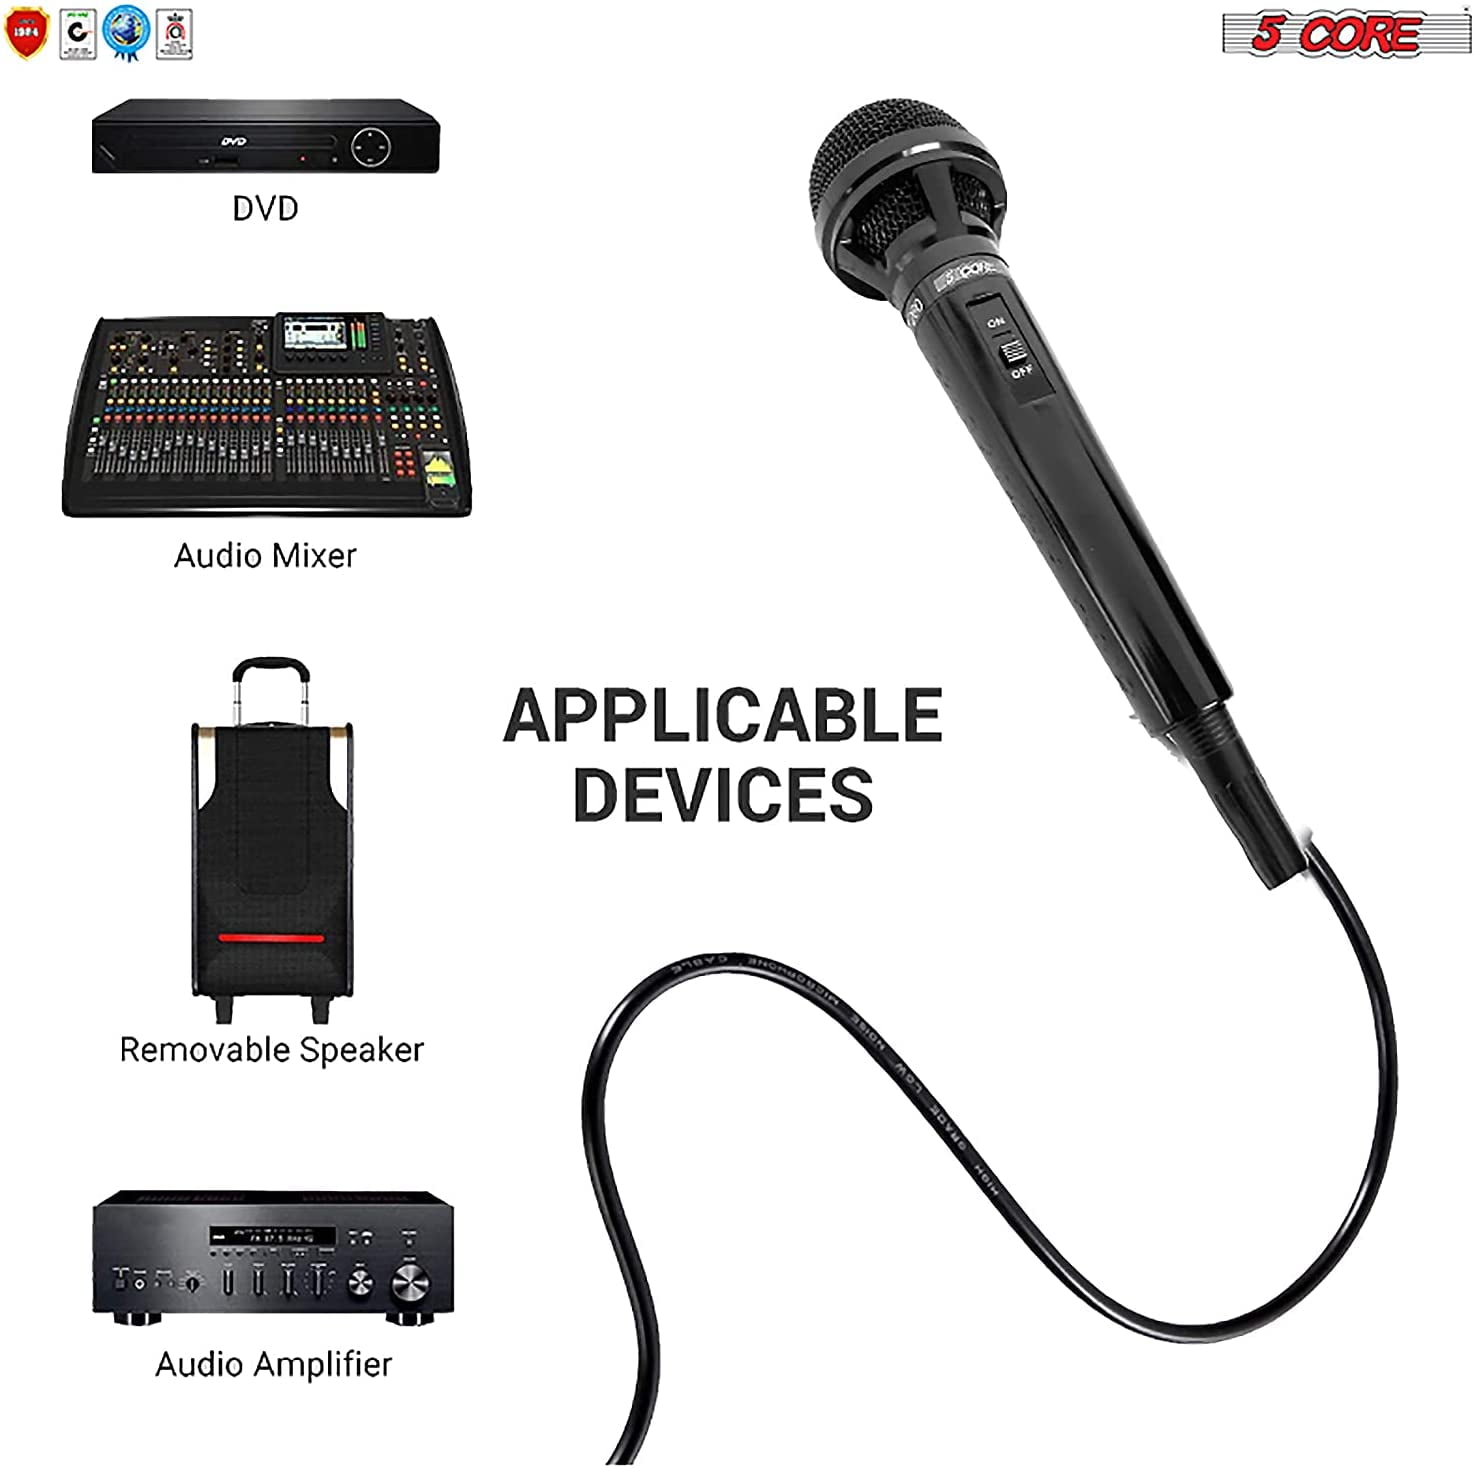 PM-66K 2 pcs Professional Microphone 2 Pack Audio Dynamic Cardiod Karaoke Singing Wired Mic Music Recording Karoke Microphone with 2X Cable Bundle 5 Core PM625 Ratings 